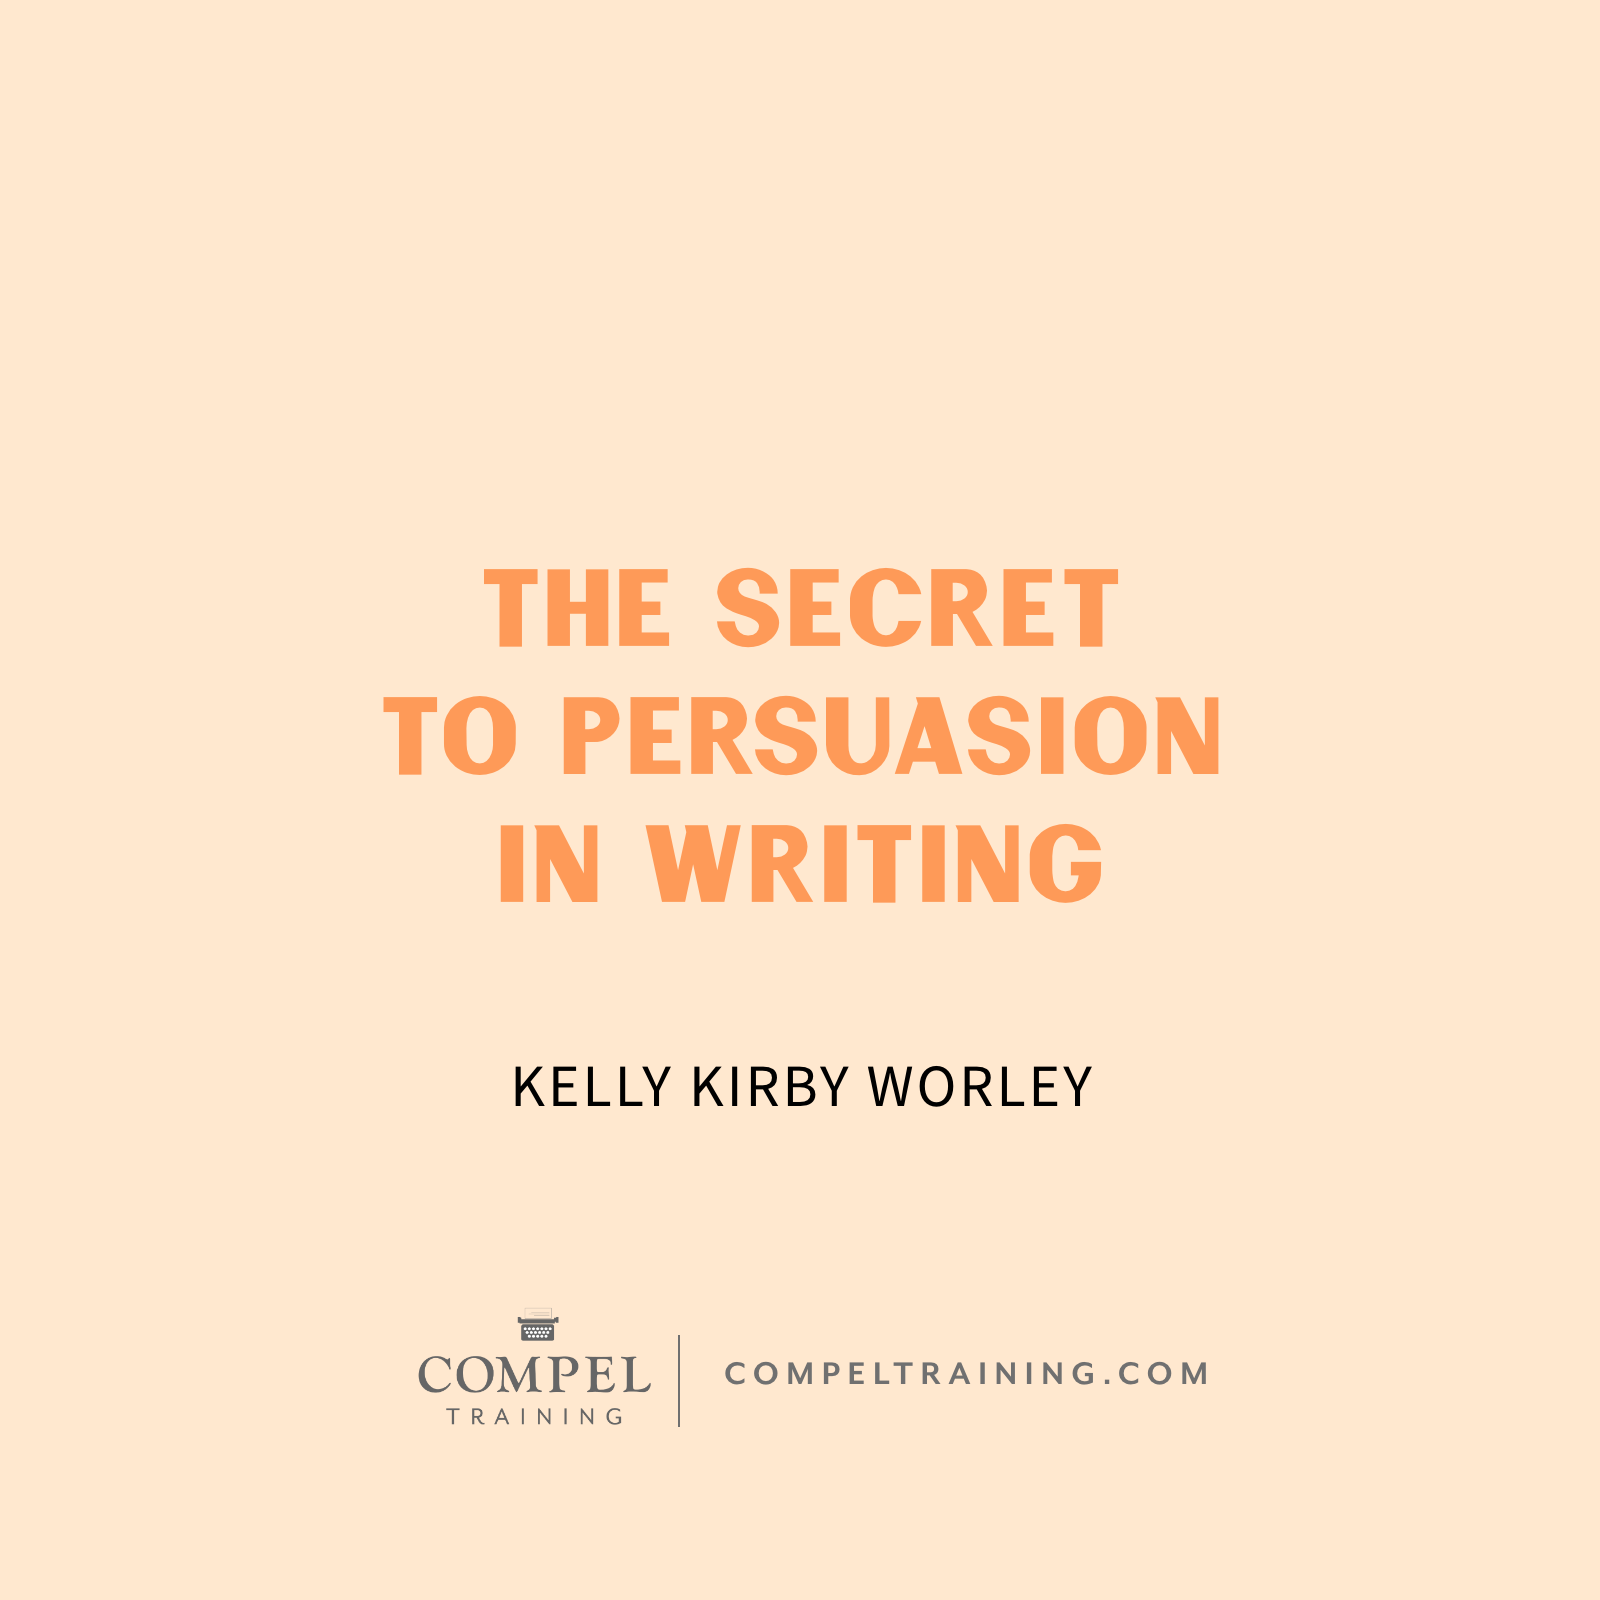 The Secret to Persuasion in Writing